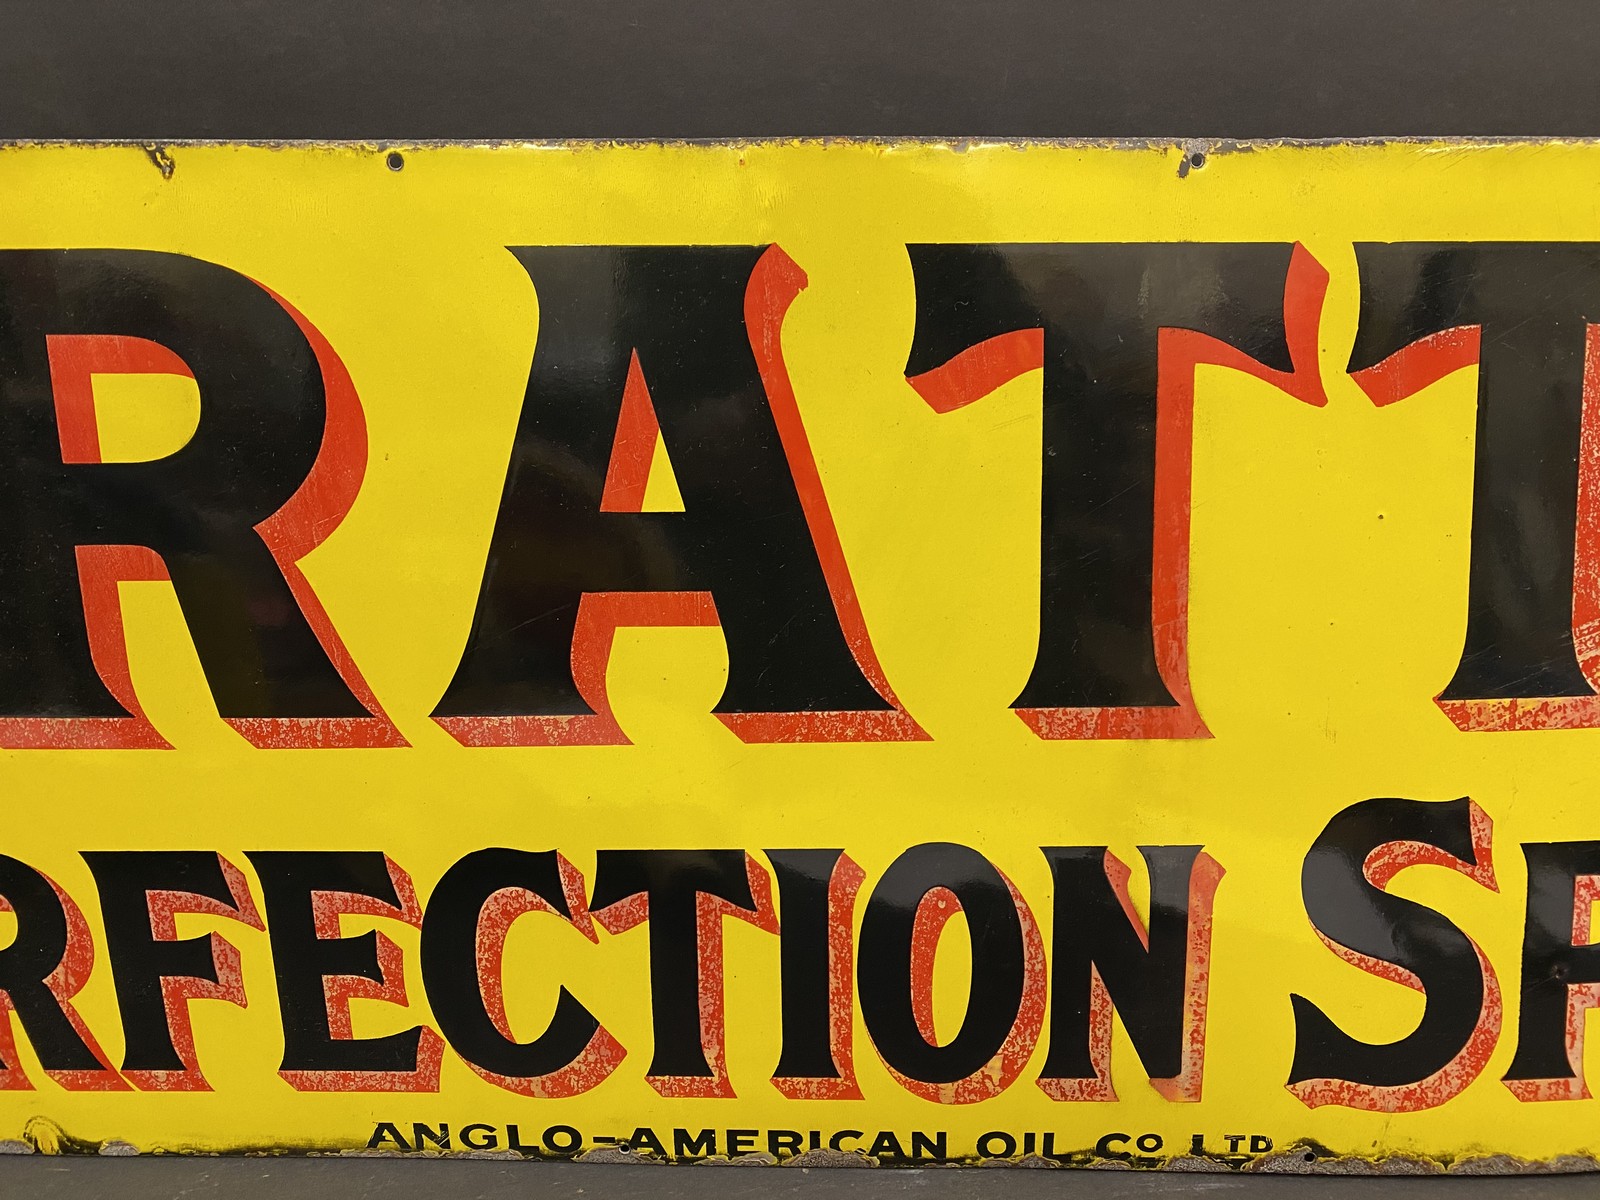 A Pratt's Perfection Spirit rectangular enamel sign by Imperial Enamel, in superb condition, 52 x - Image 3 of 6